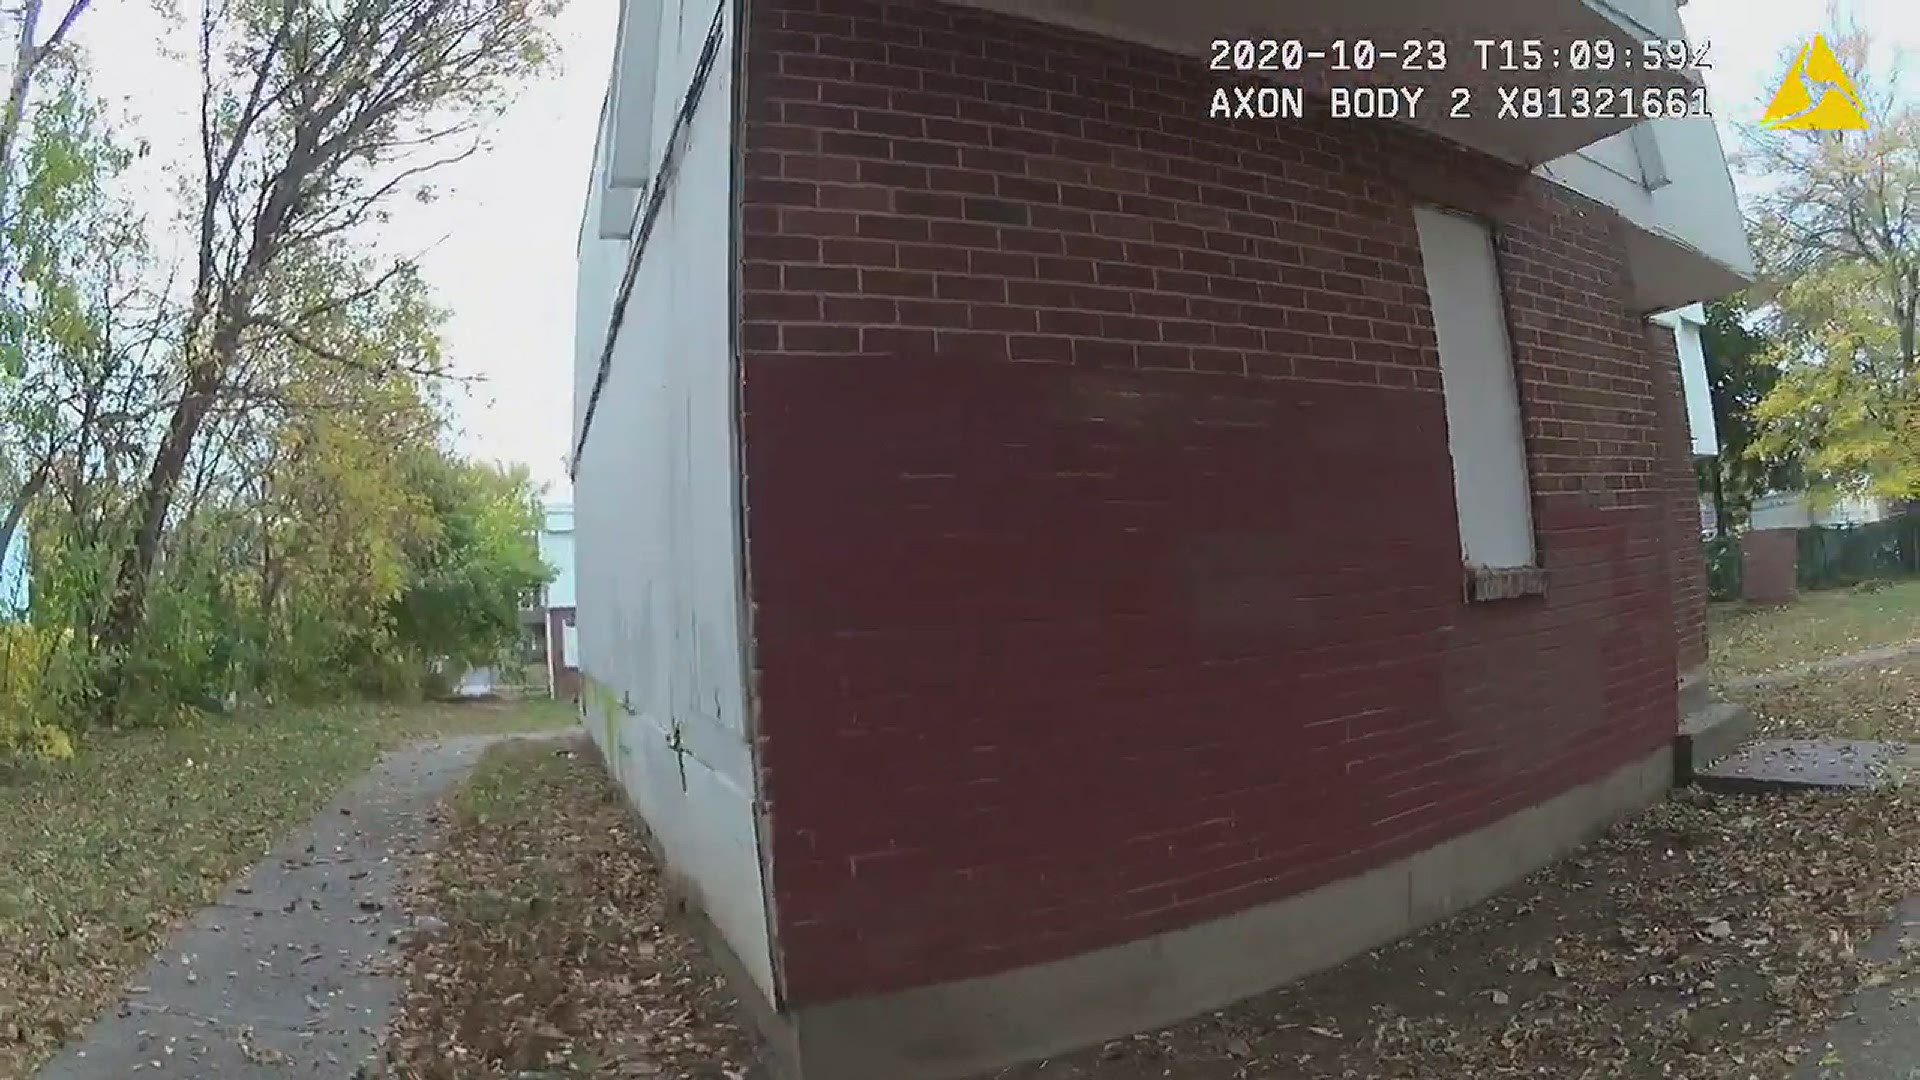 Amazon delivery truck theft suspect eludes police on body camera.